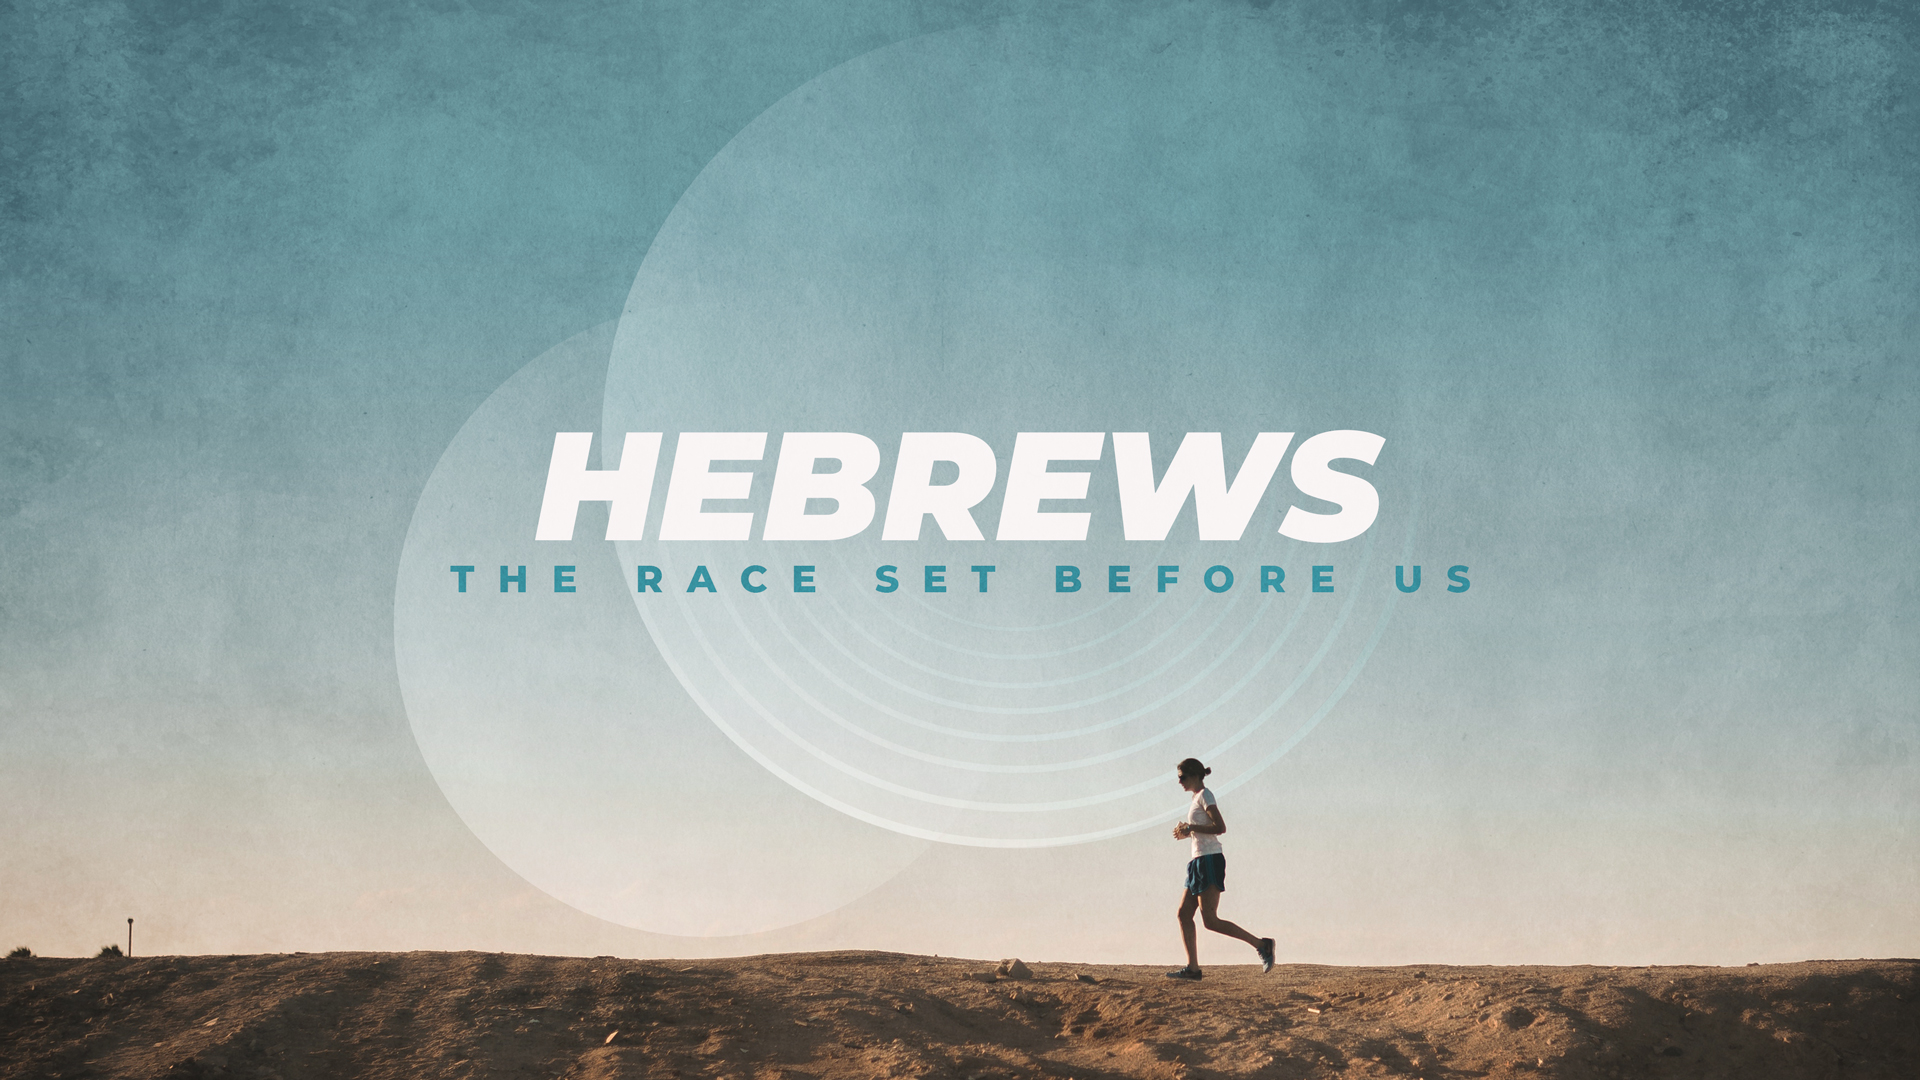 Hebrews the Race Set Before Us graphic with a person running in the background